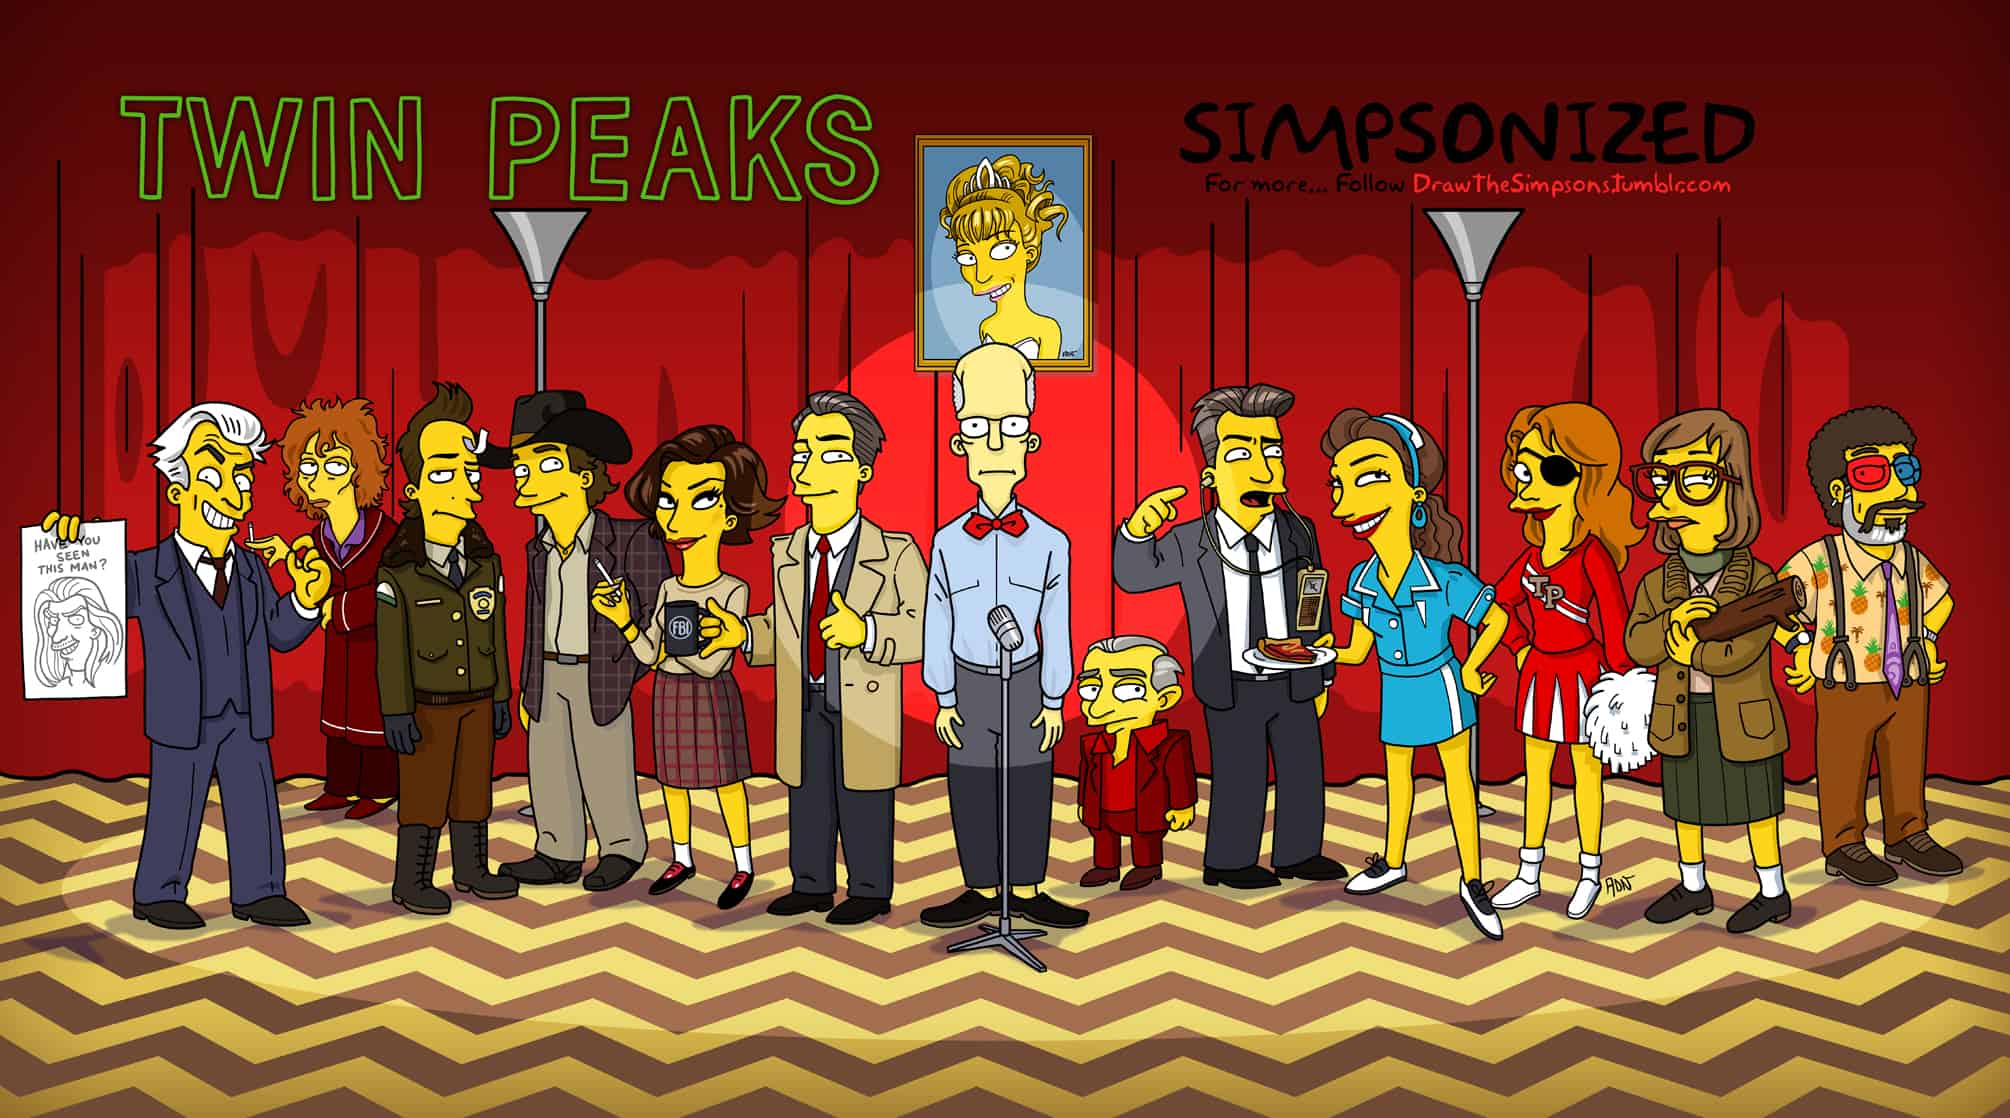 15 Twin Peaks Characters As If They Appeared On The Simpsons